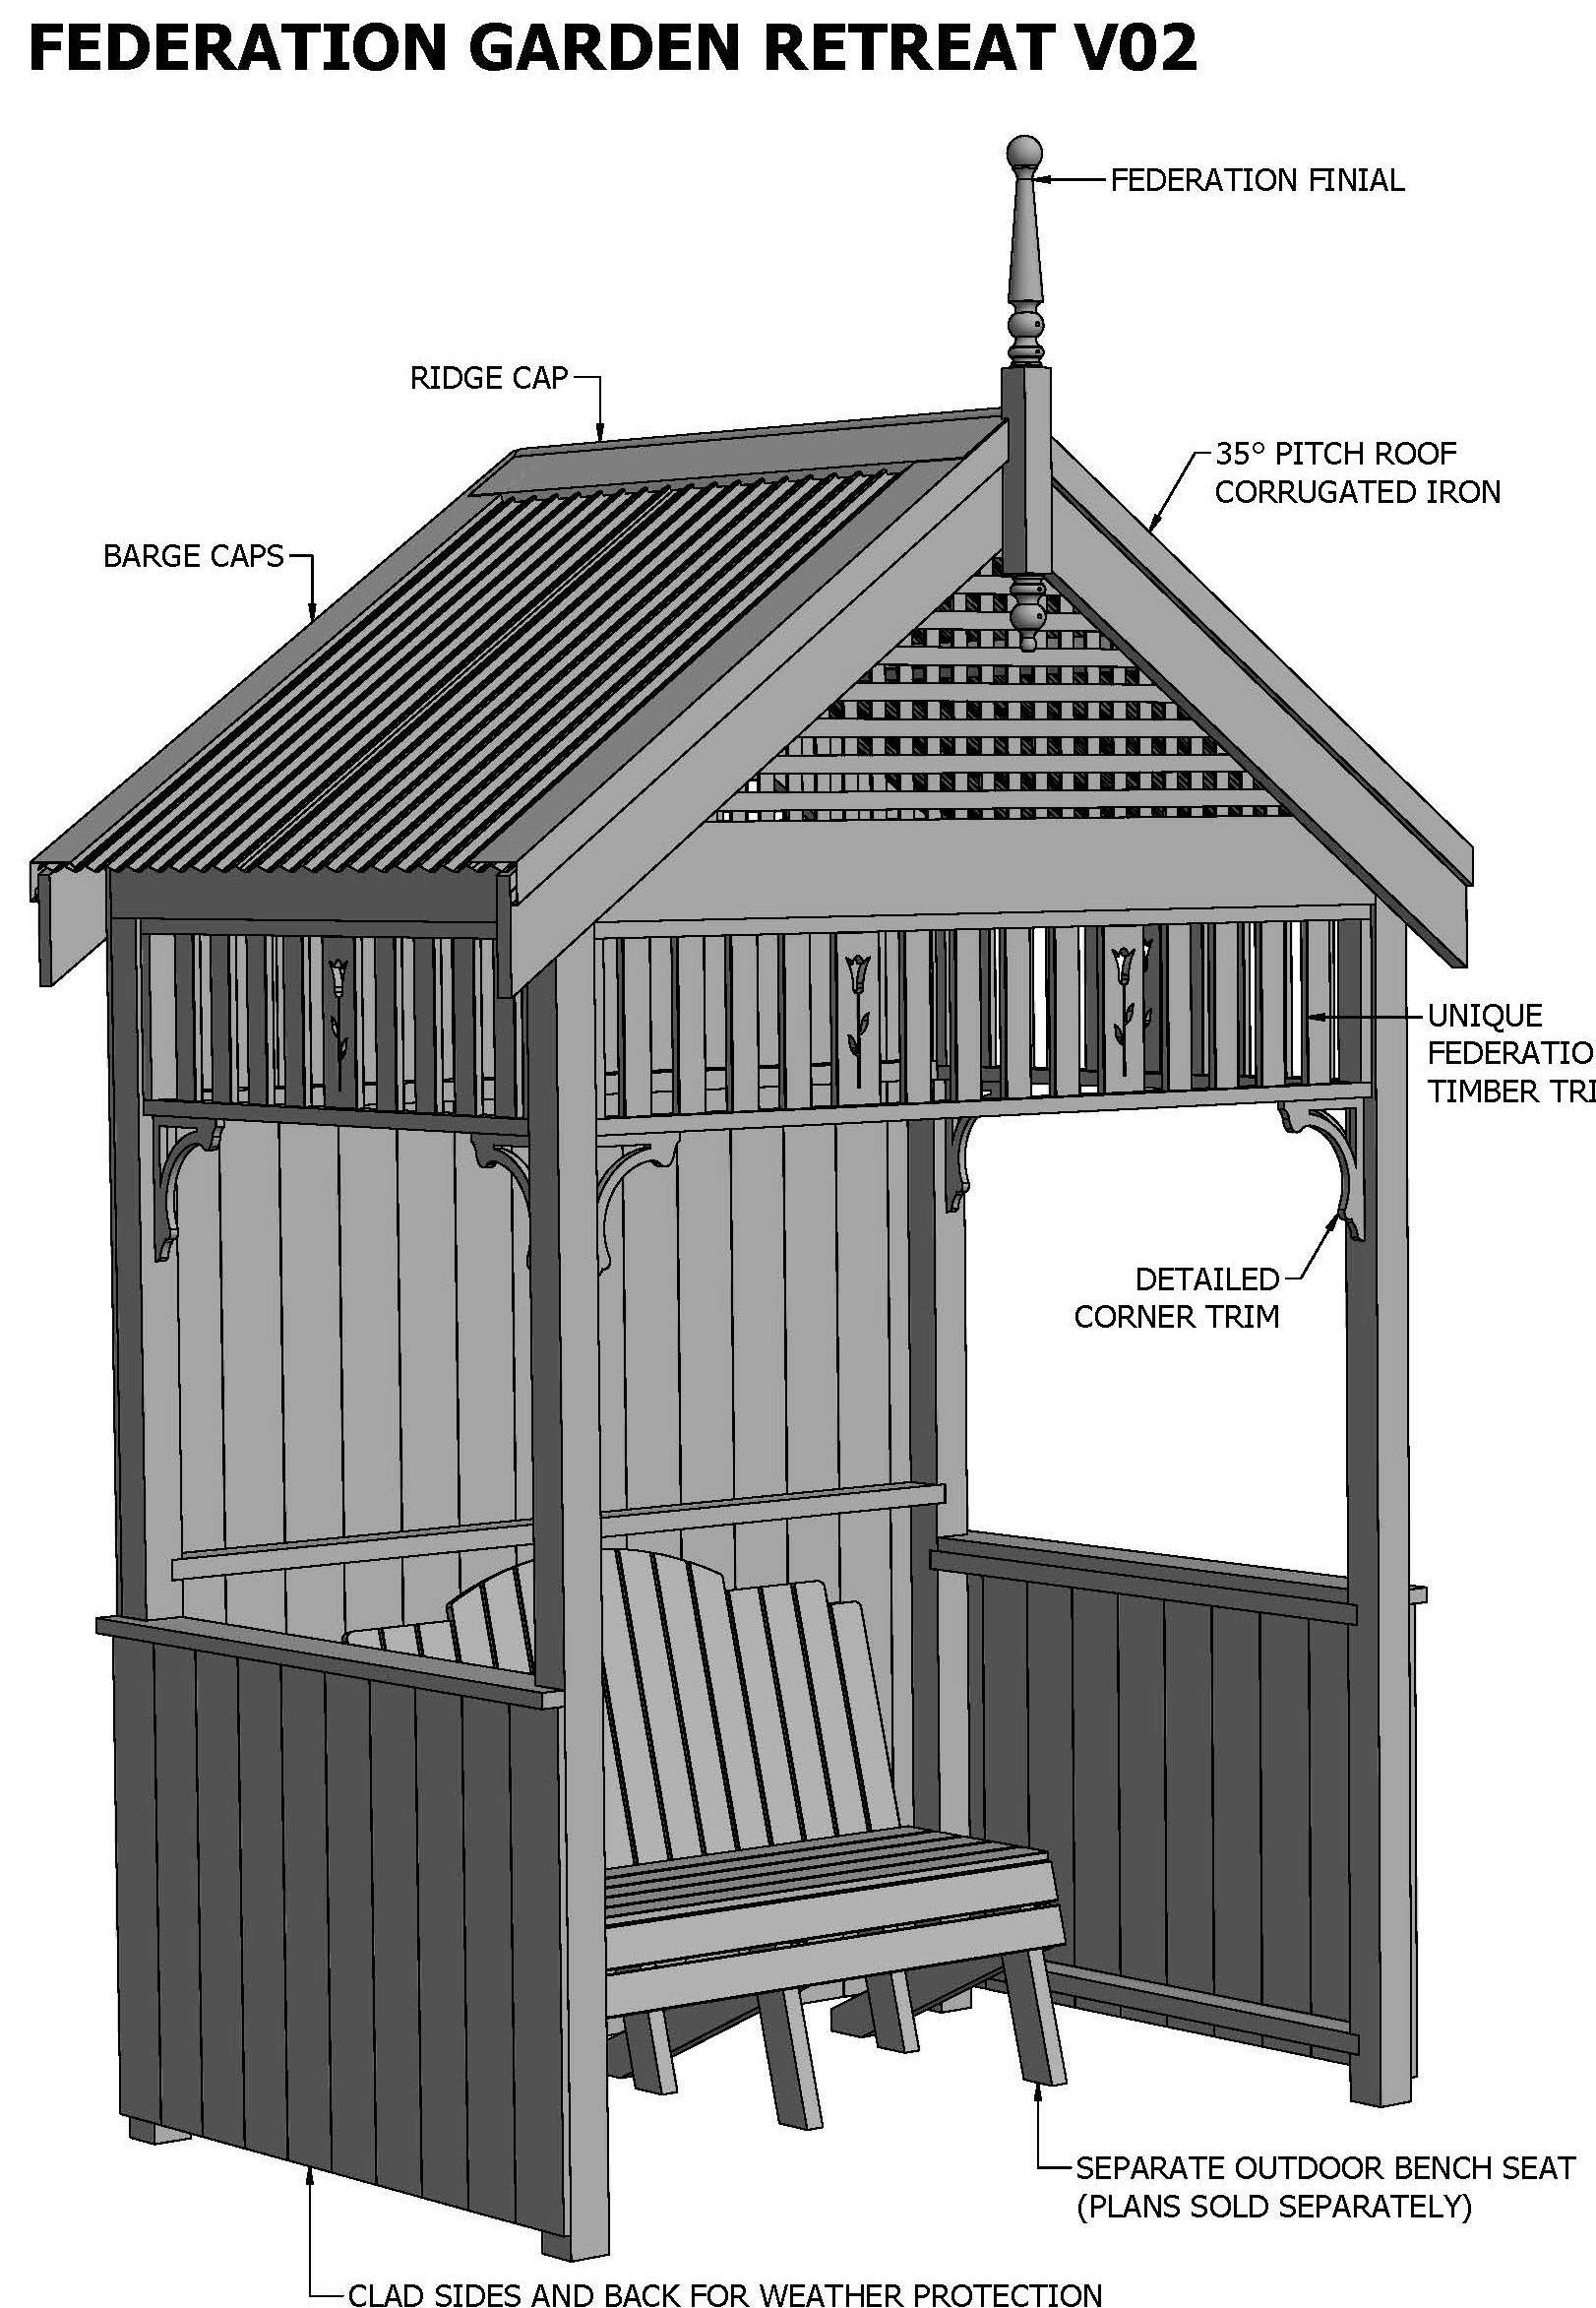 FEDERATION STYLE OUTDOOR GARDEN RETREAT HIDE AWAY V02 (Building Plans ONLY)